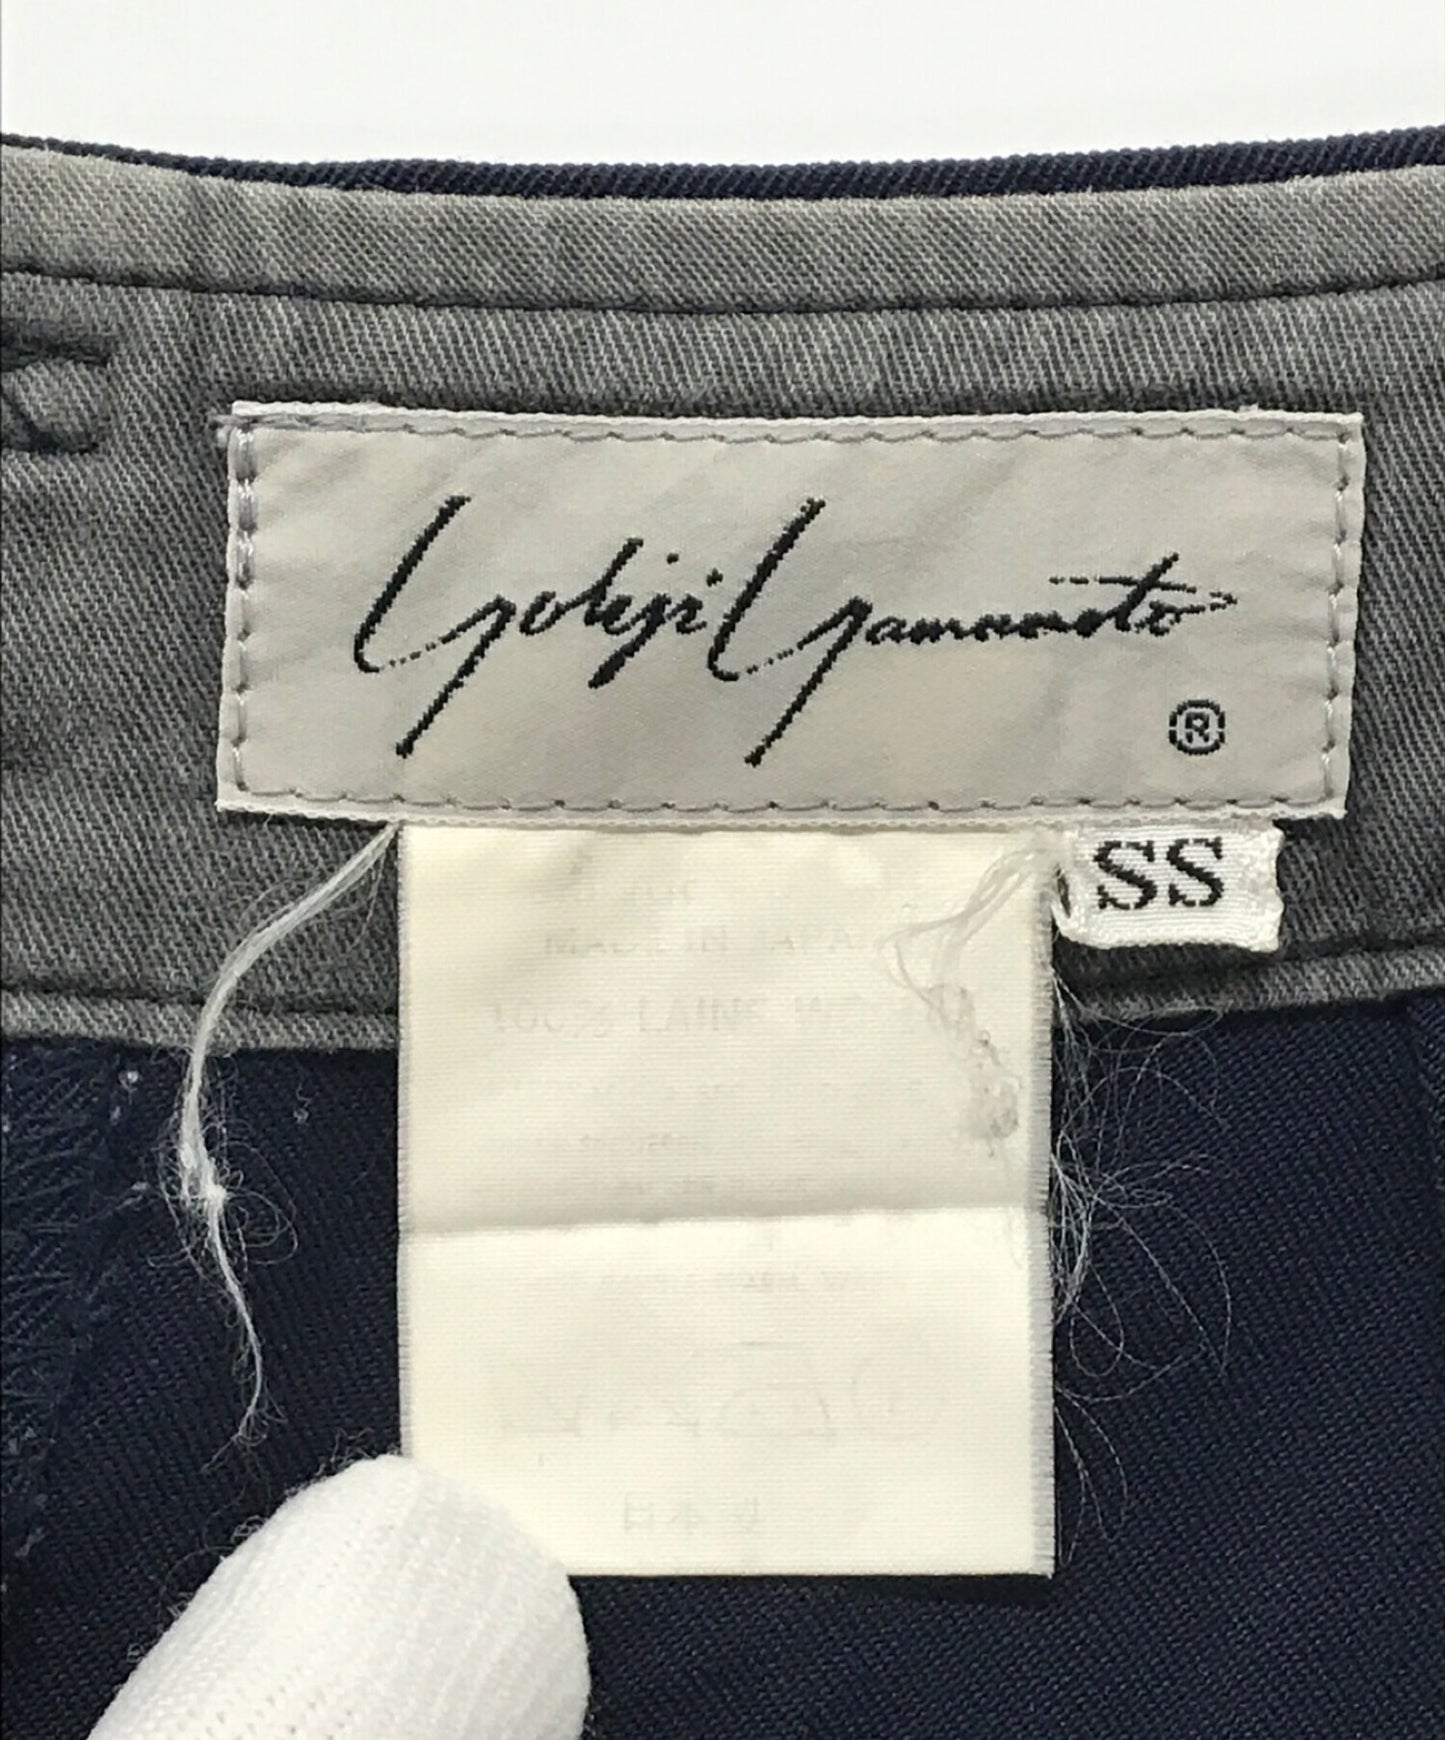 [Pre-owned] YOHJI YAMAMOTO Tucked tapered pants, slacks, round letter logo, estimated 80~90's 80's 90's archive